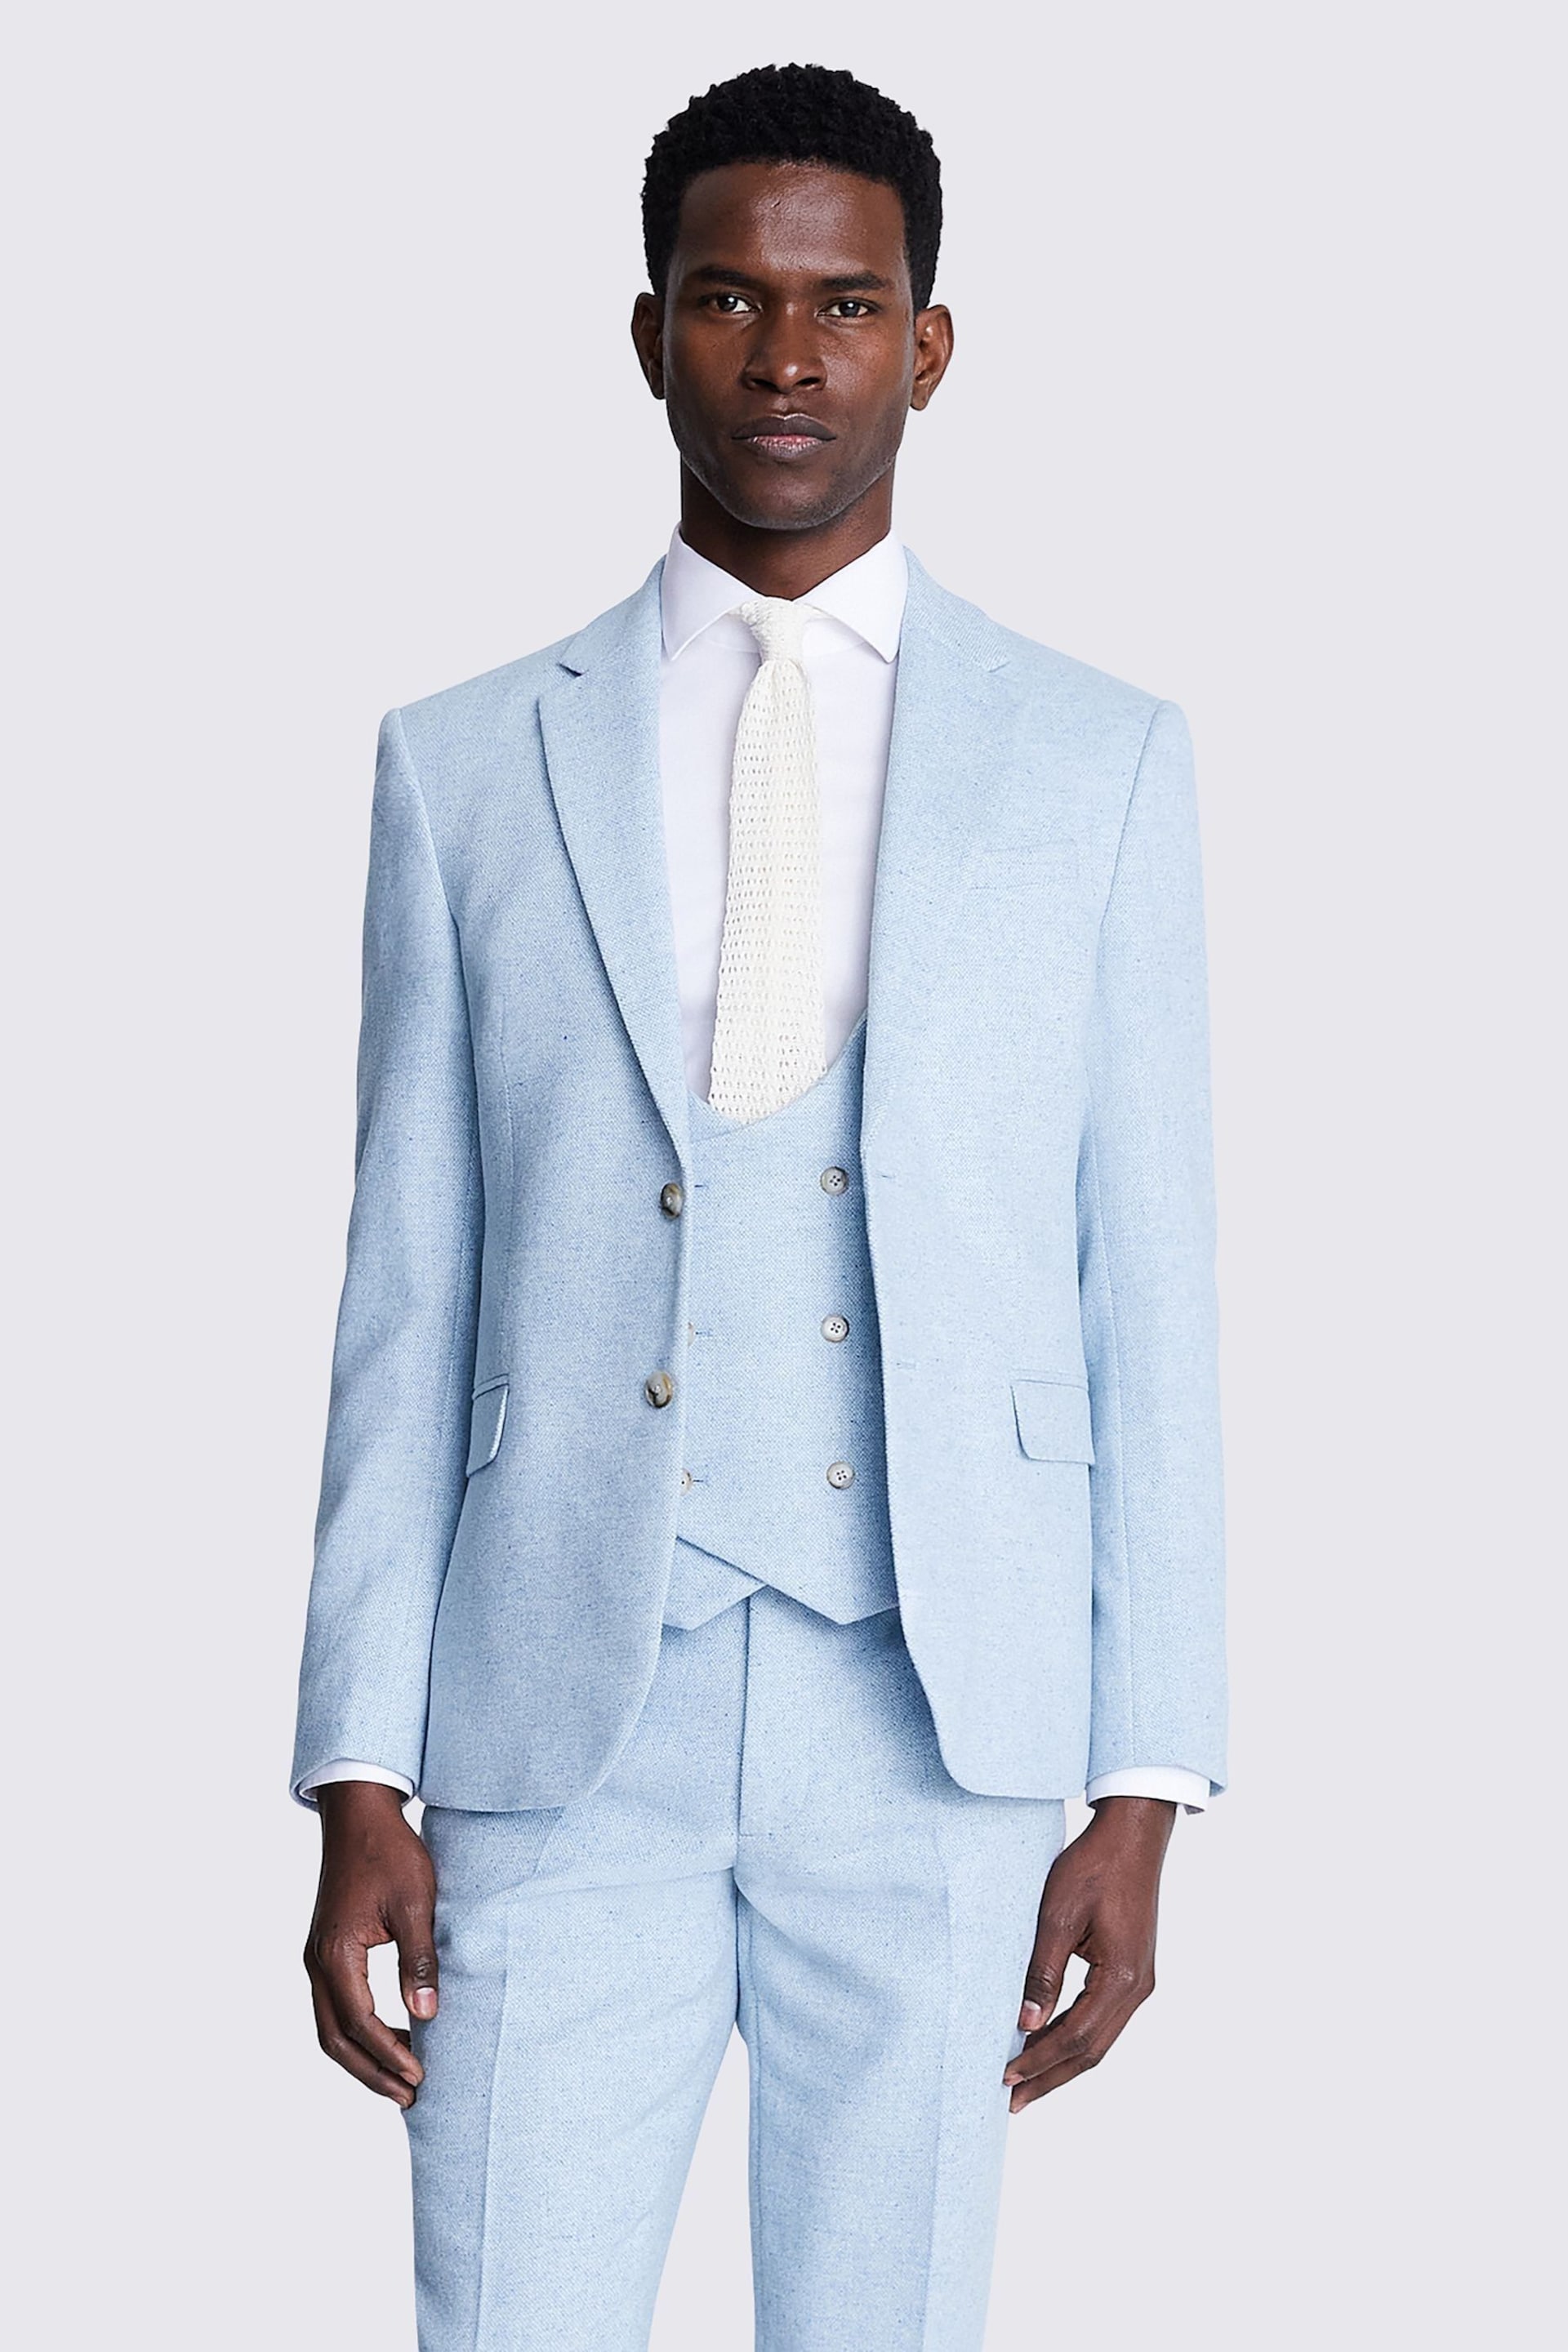 MOSS Slim-Fit Blue Donegal Jacket - Image 1 of 6